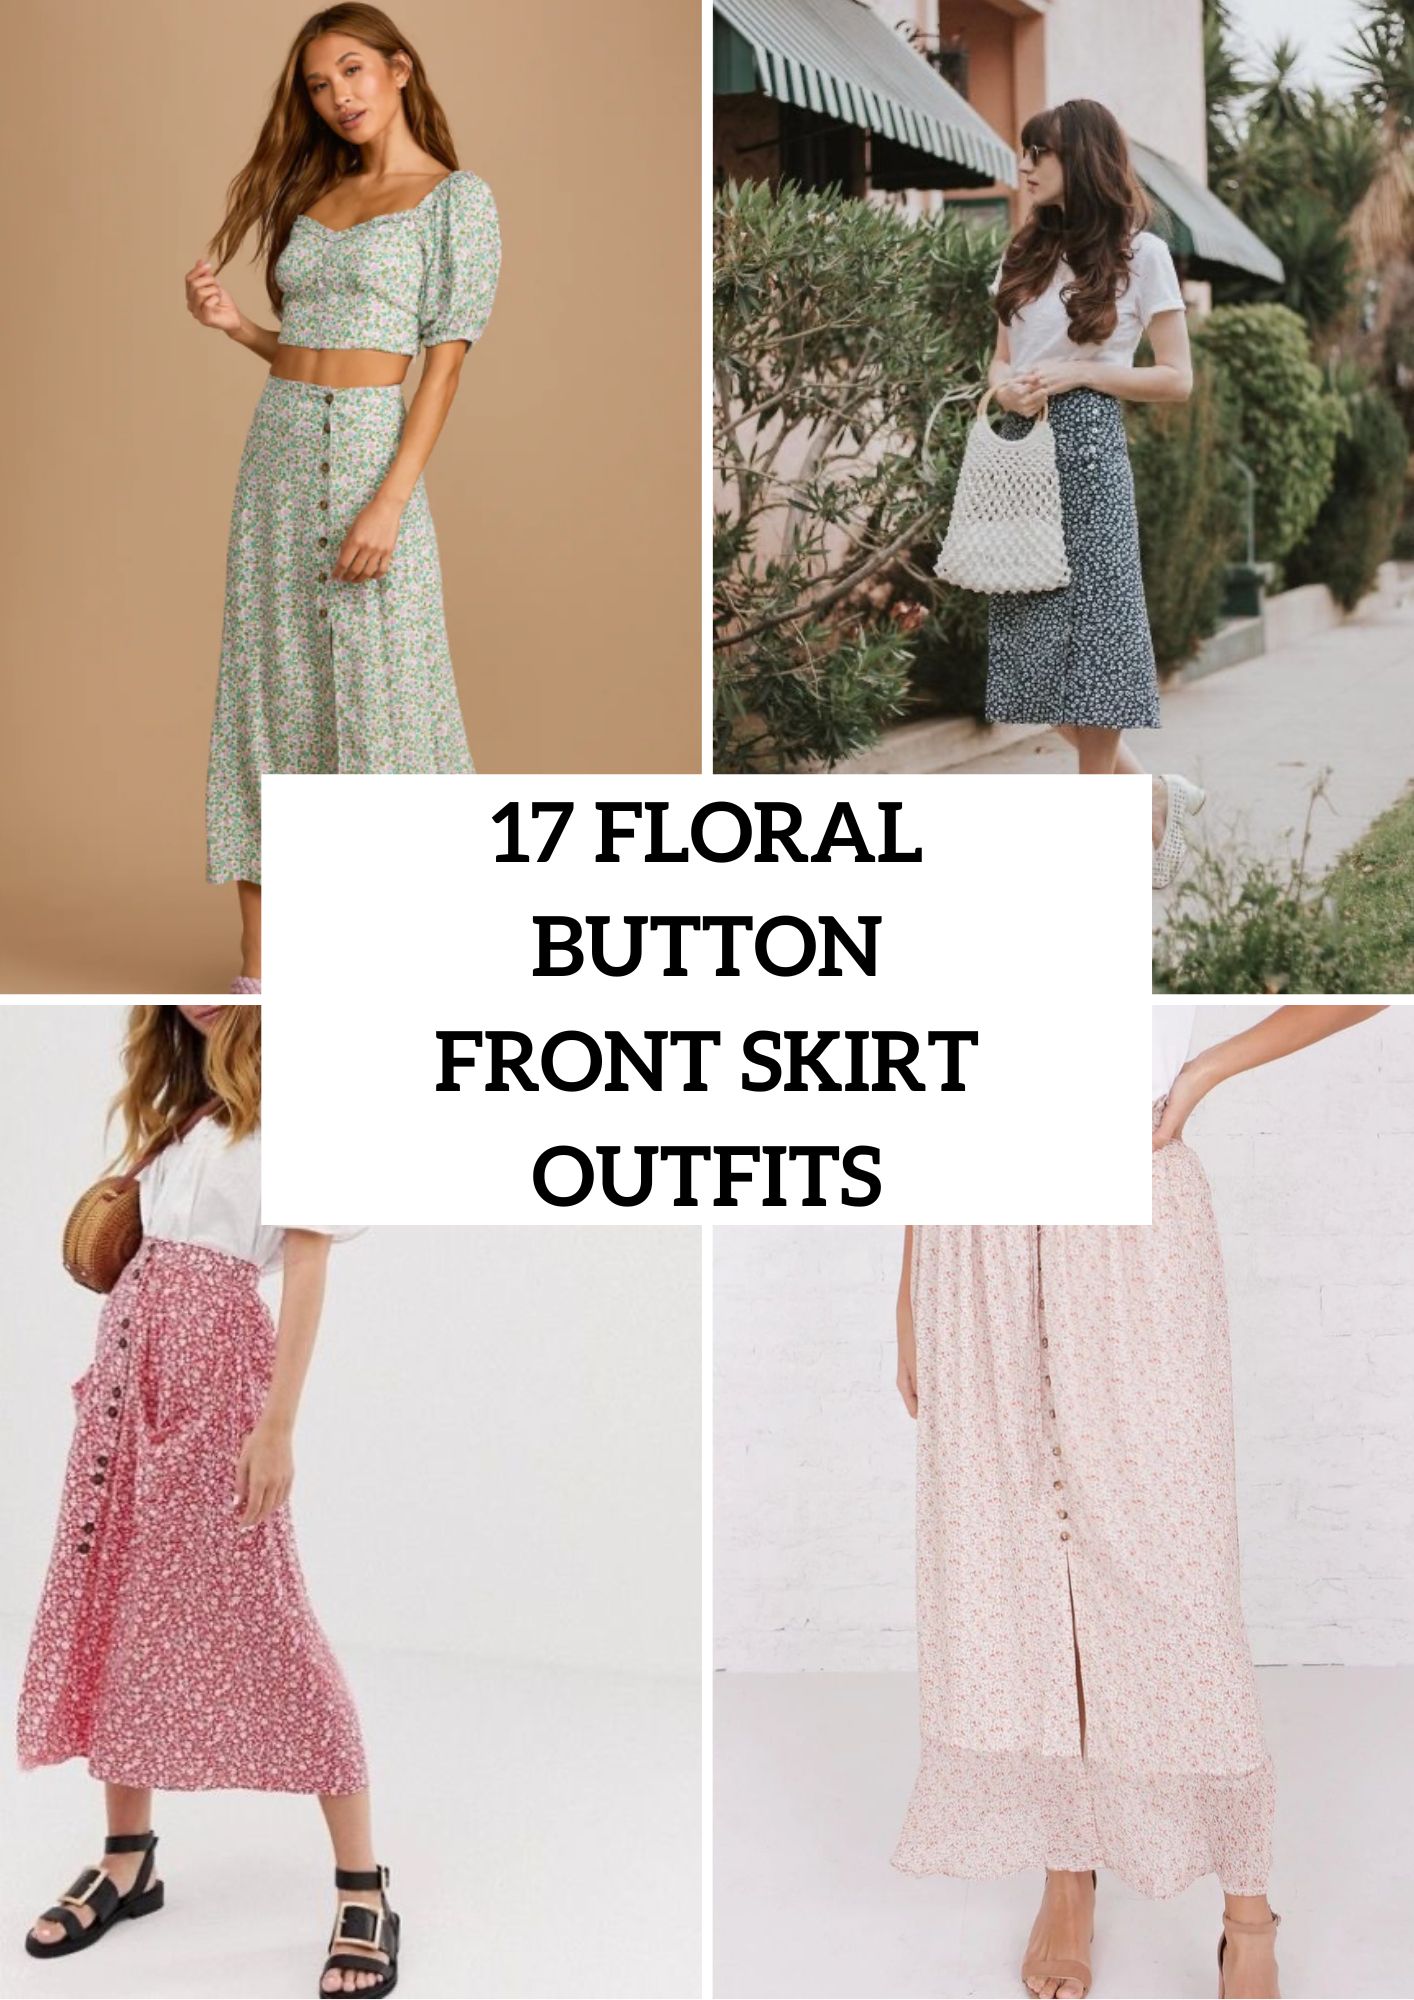 Floral Printed Button Front Skirt Outfit Ideas